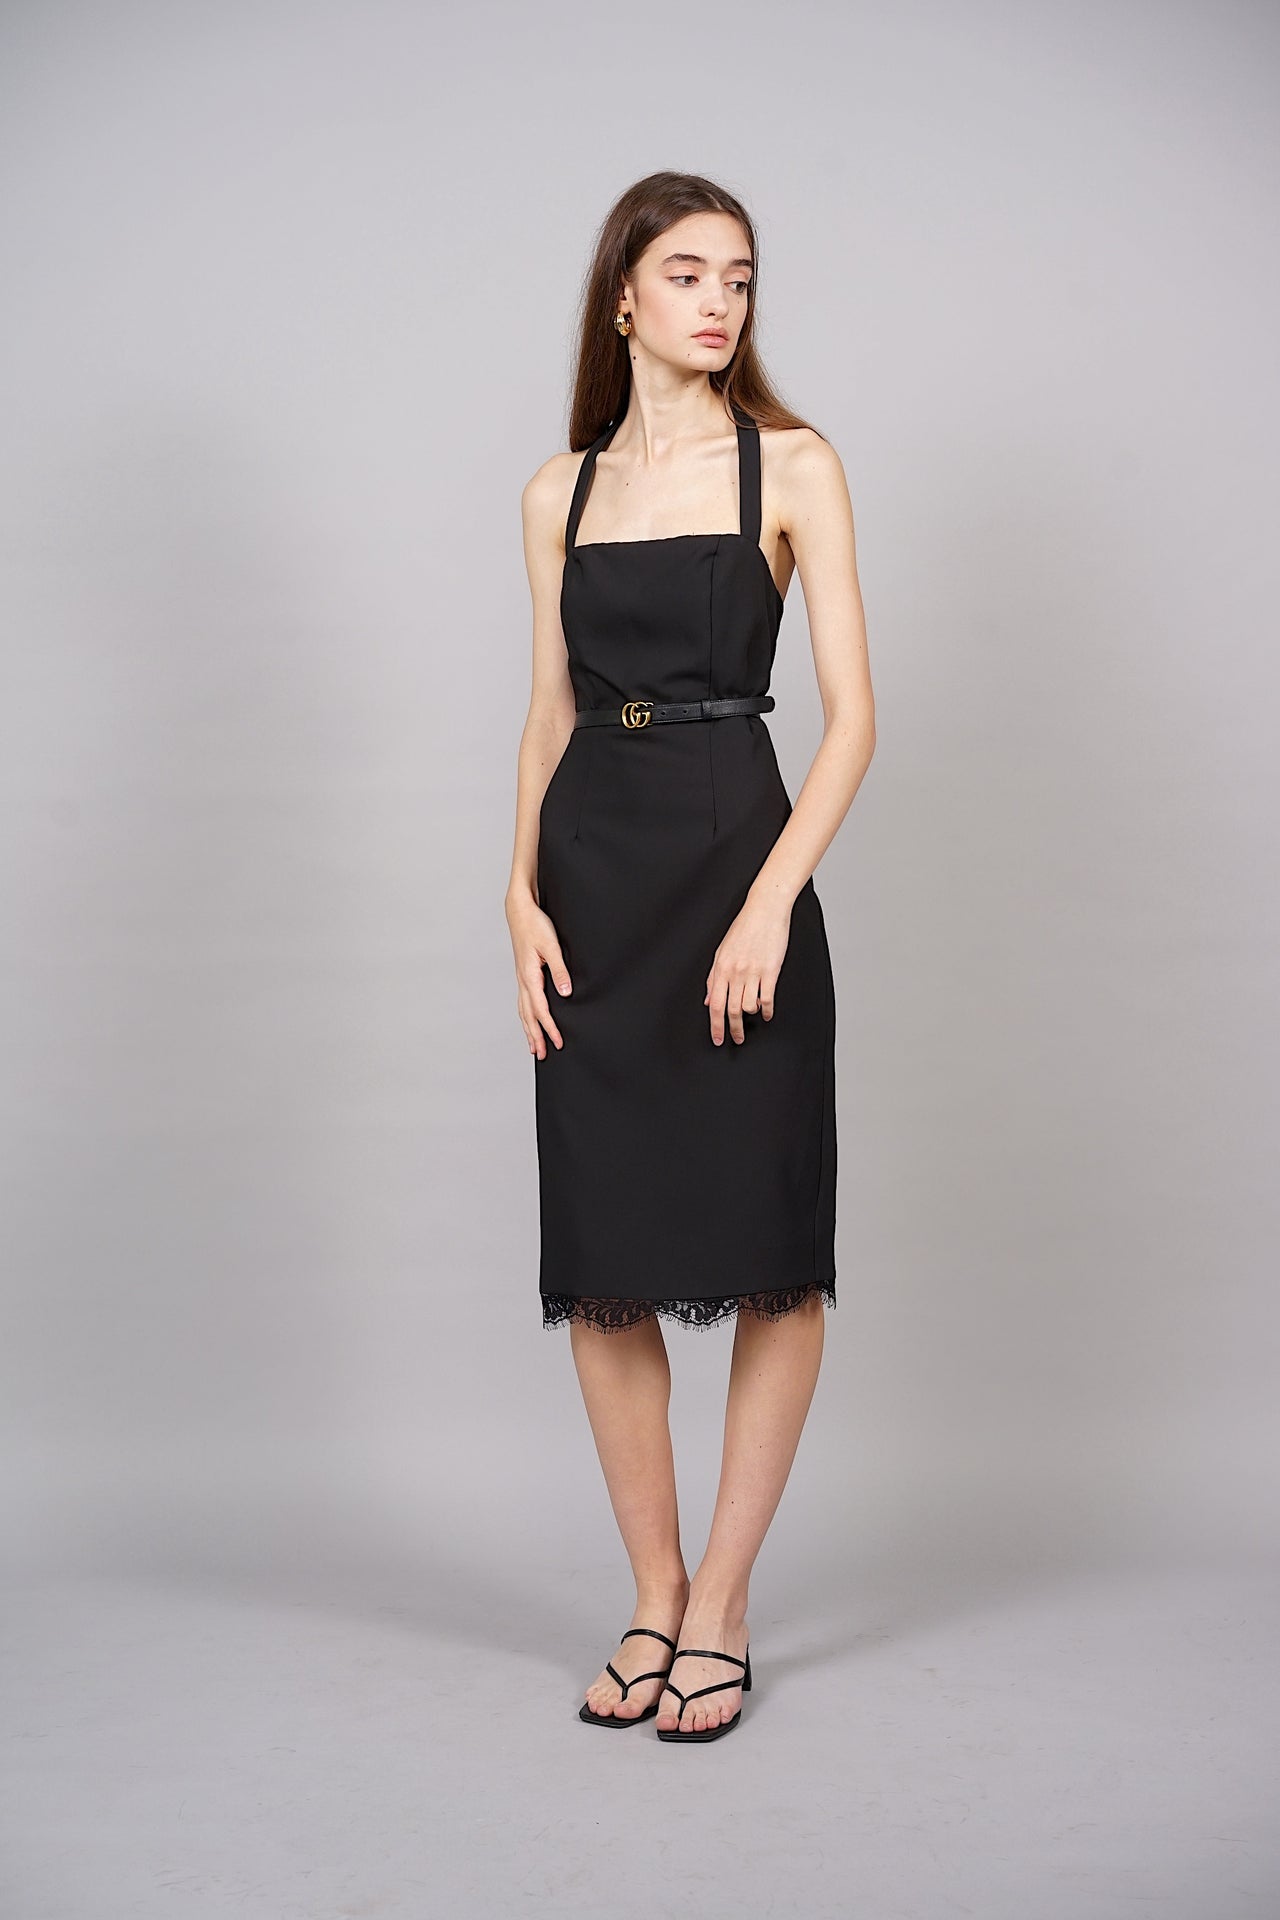 Ronda Lace-Trimmed Dress in Black